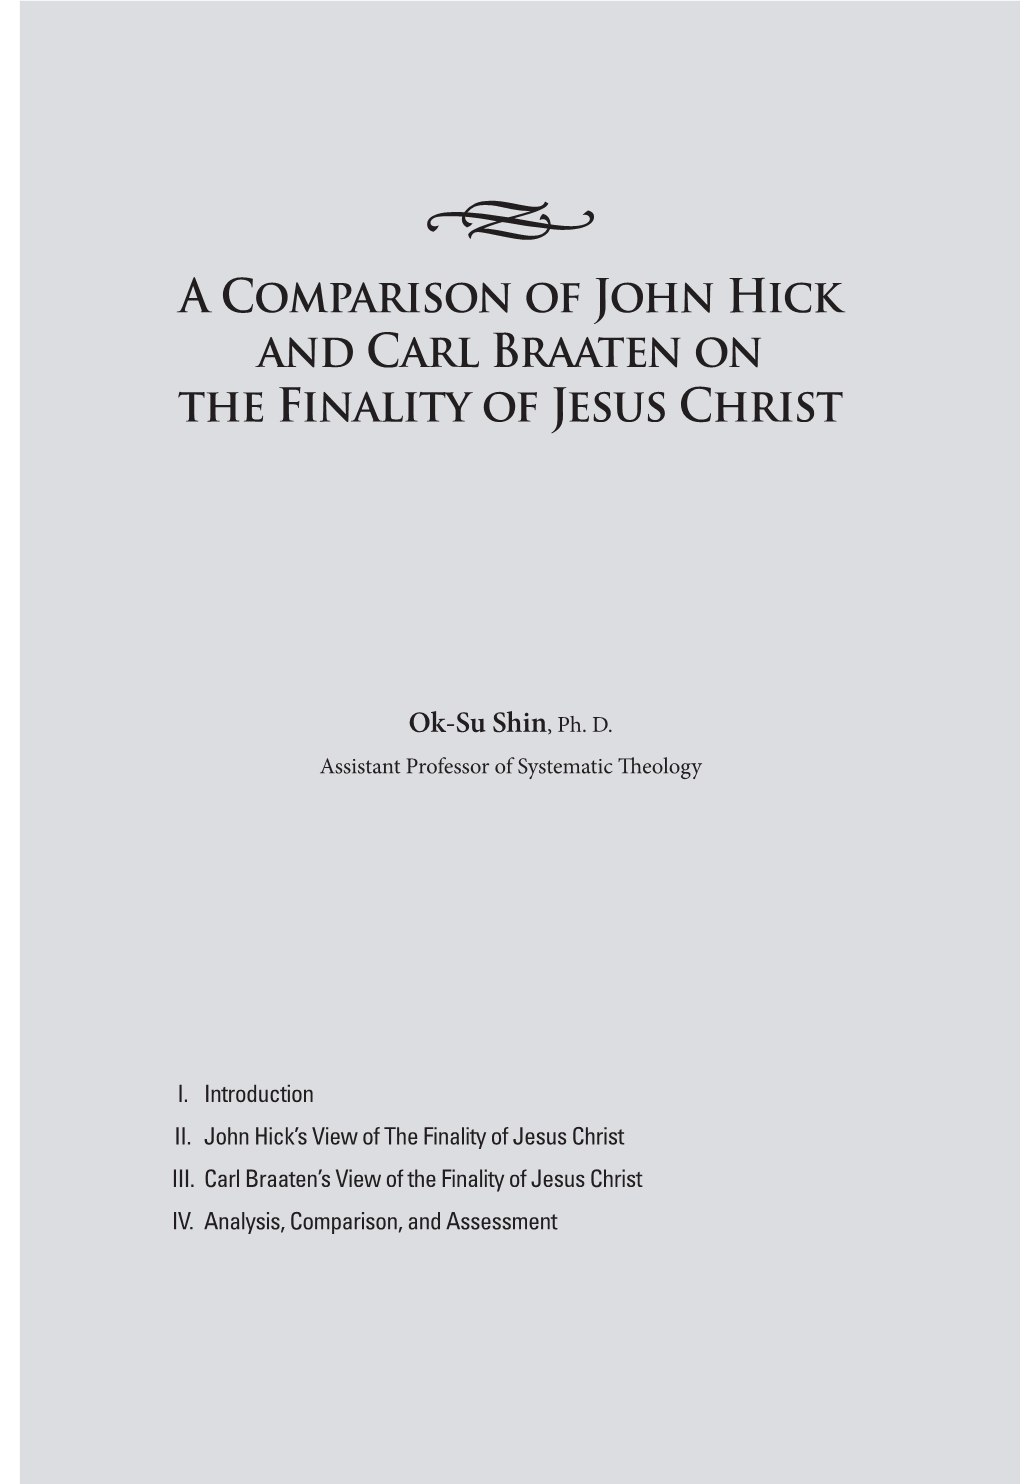 A Comparison of John Hick and Carl Braaten on the Finality of Jesus Christ